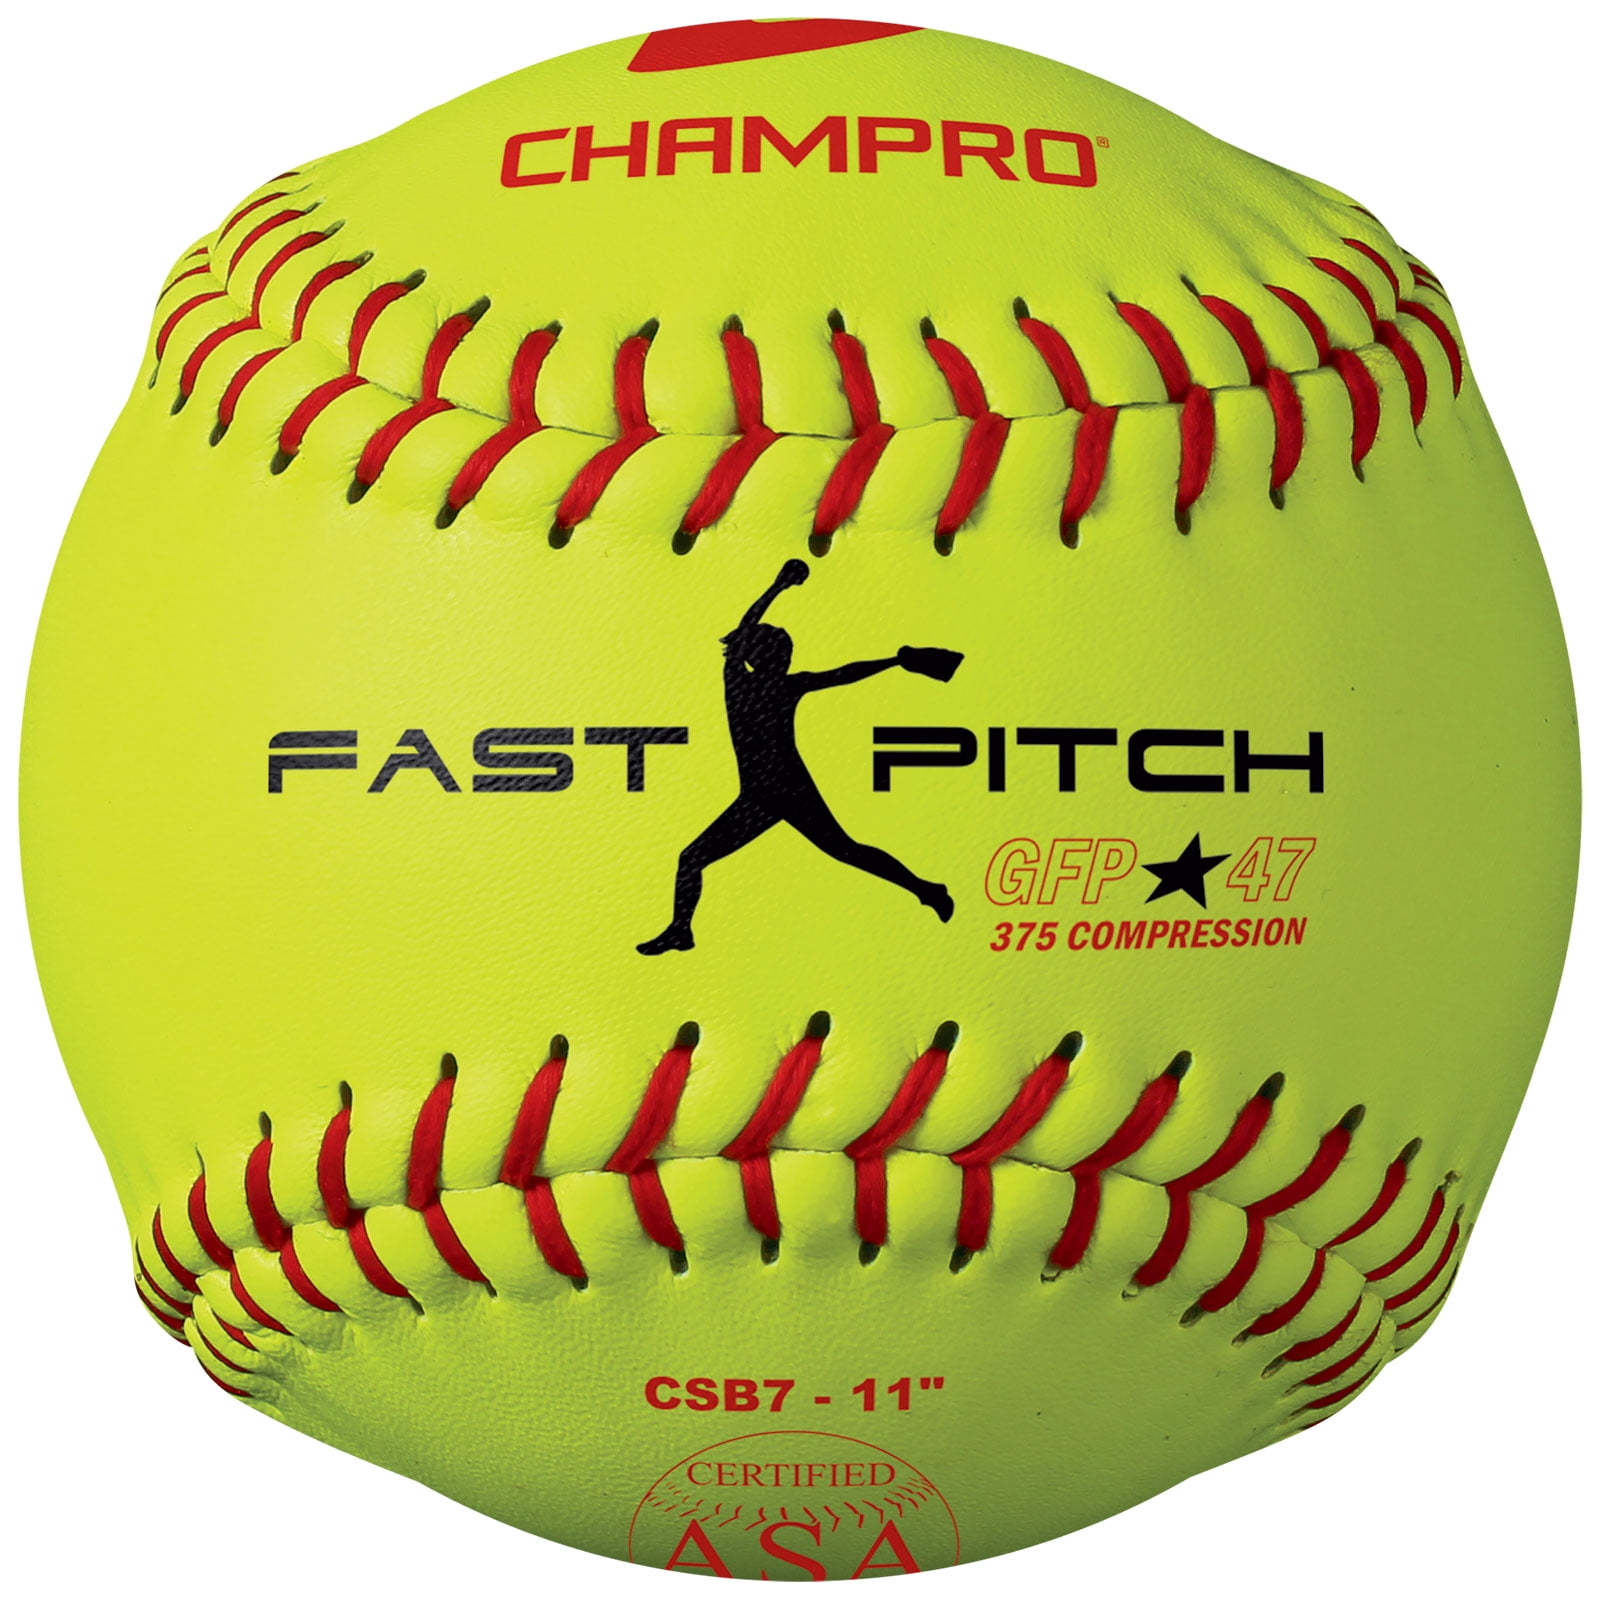 ProNine Slowpitch Softballs 12 Inch .44 COR 375 LB Yellow Compression Balls Bundled with Covey Sports Bag Multi-Packs